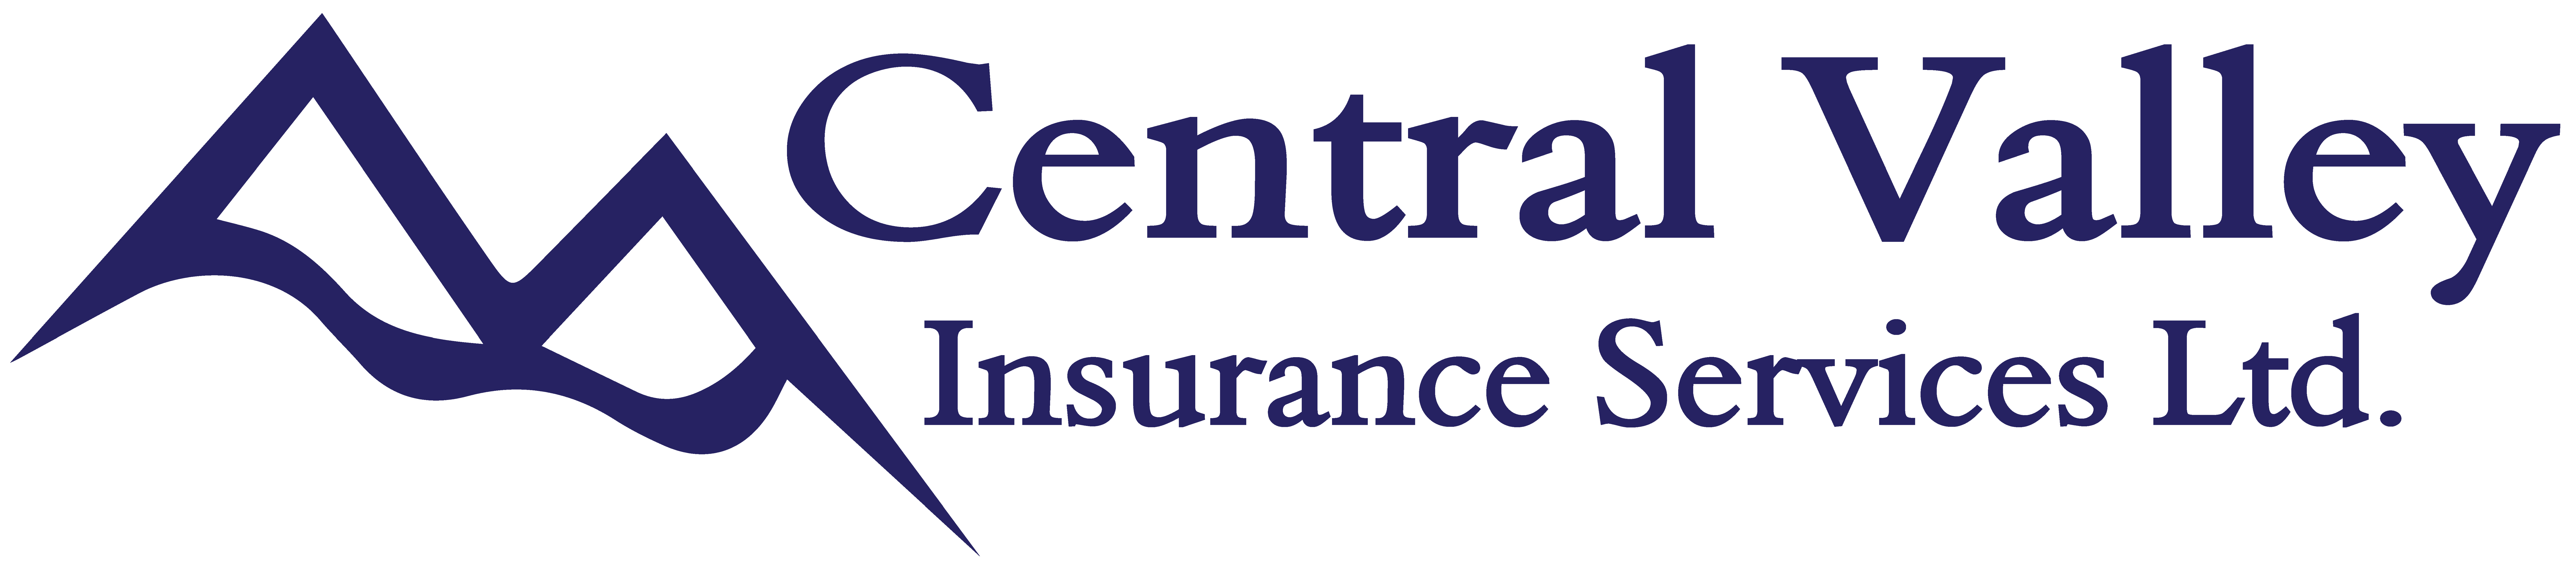 Central Valley Insurance Services  logo